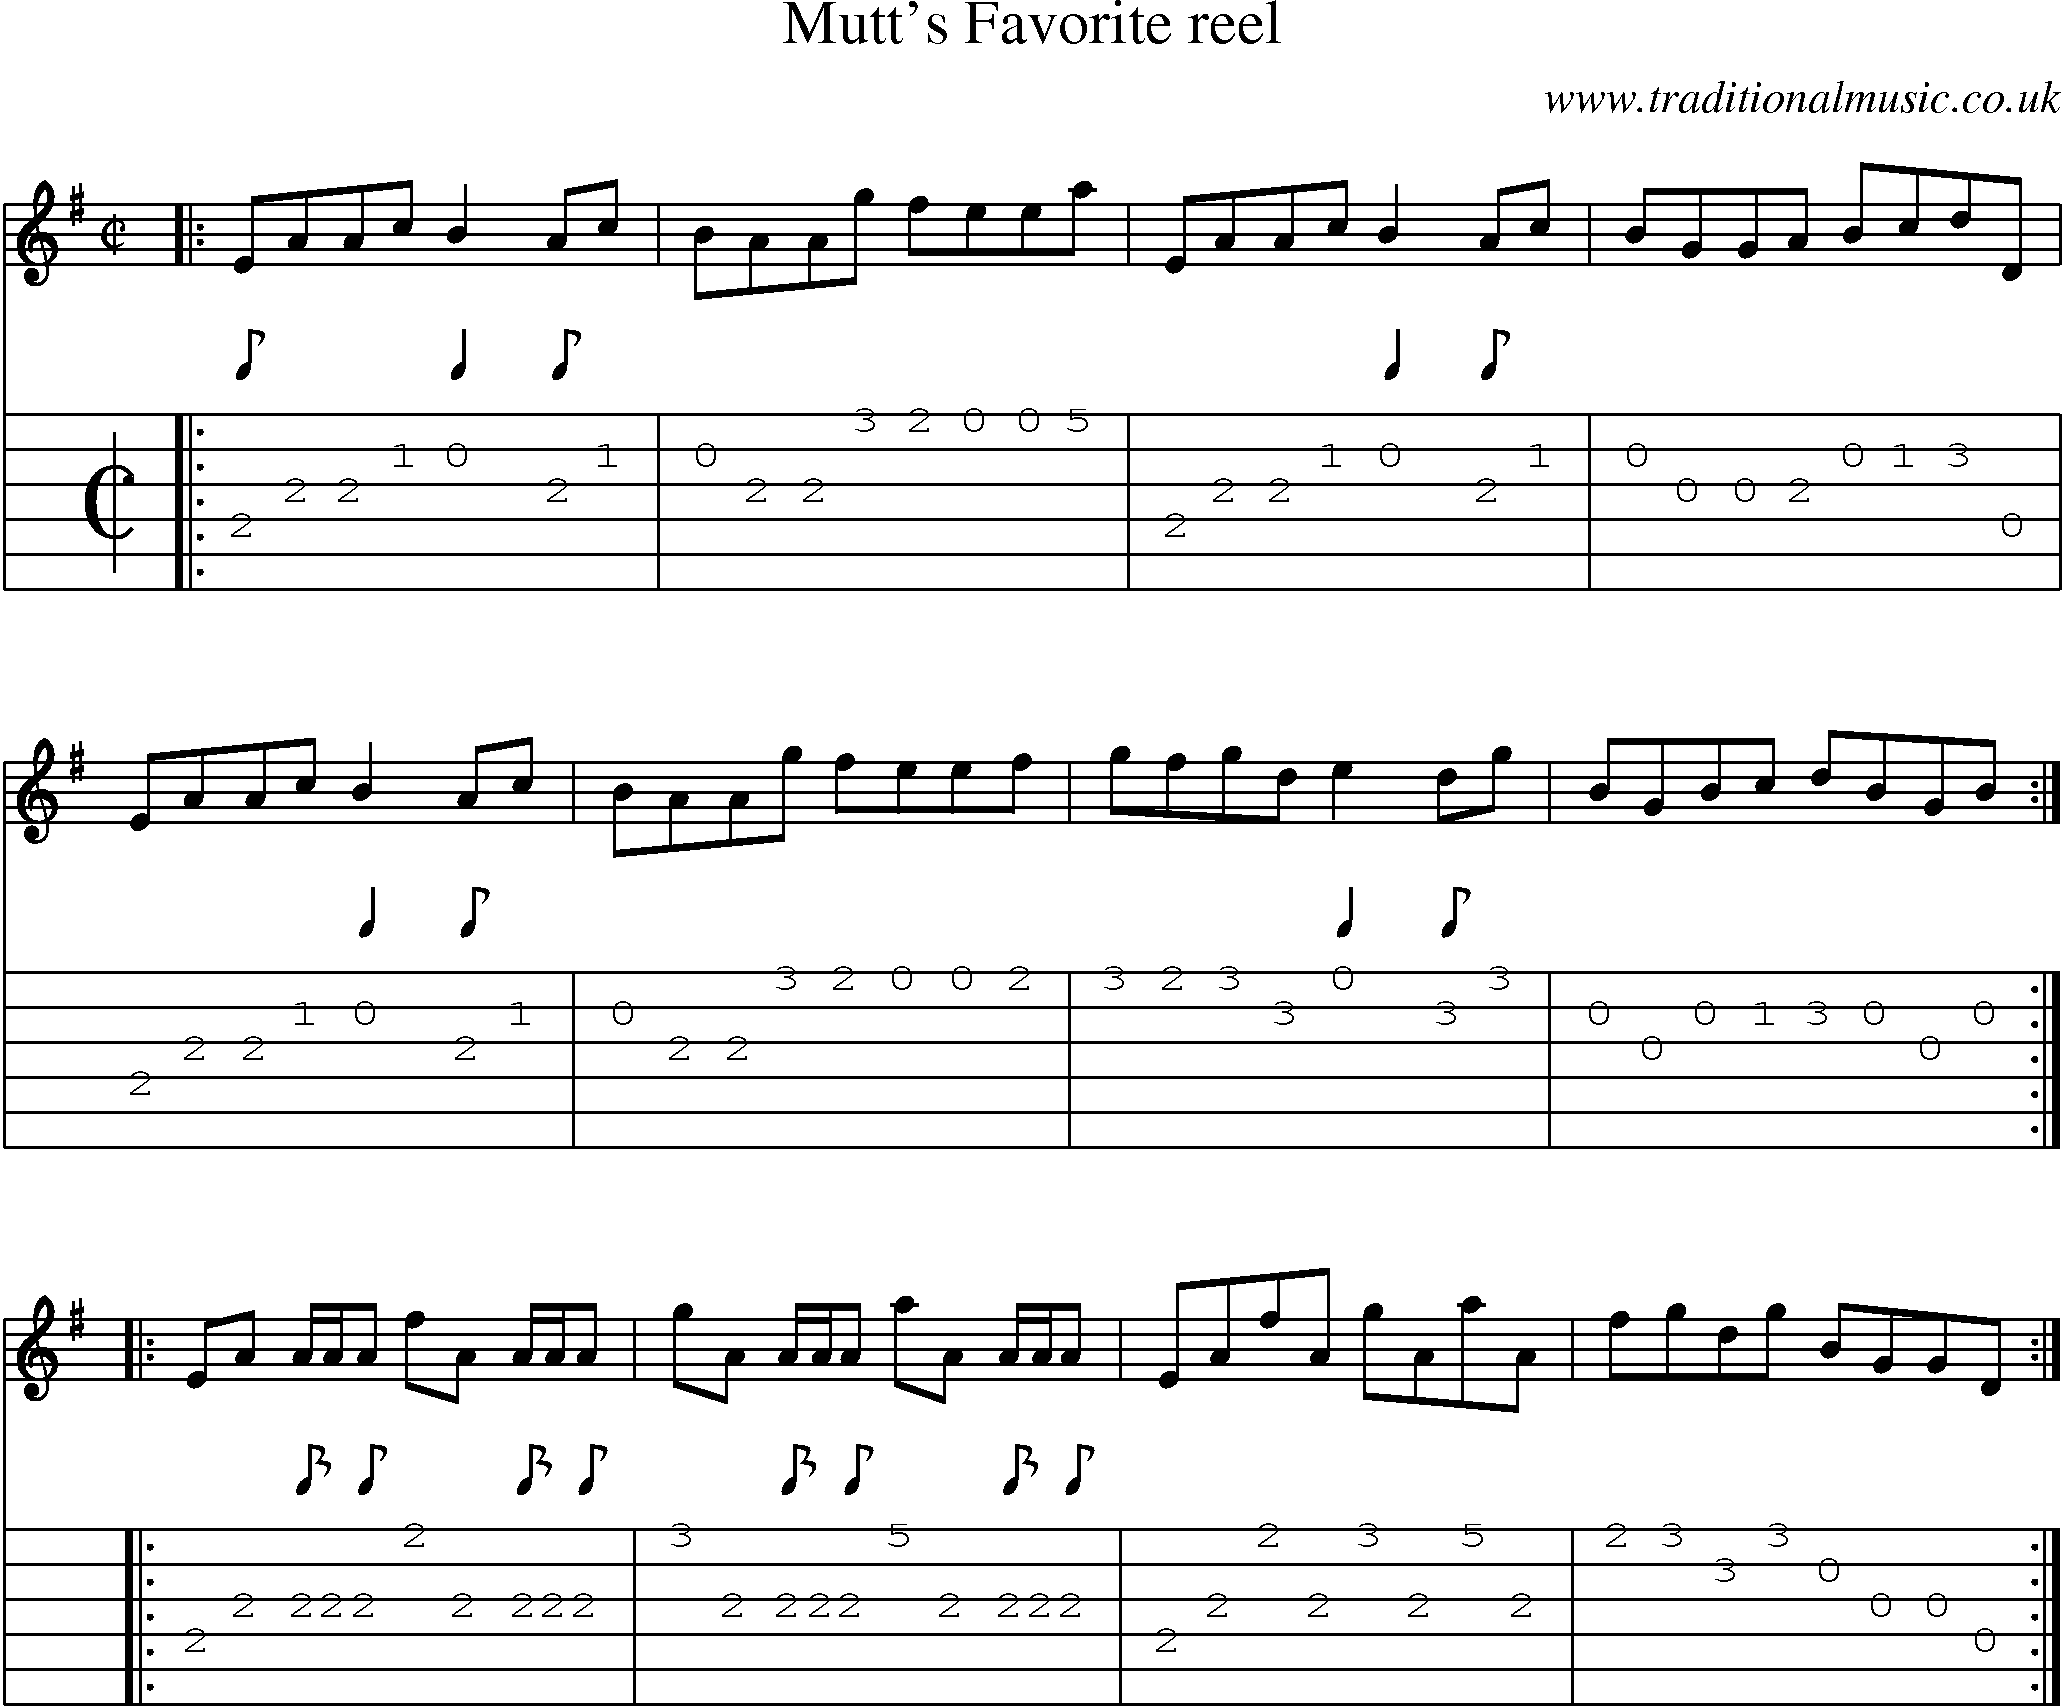 Music Score and Guitar Tabs for Mutts Favorite Reel